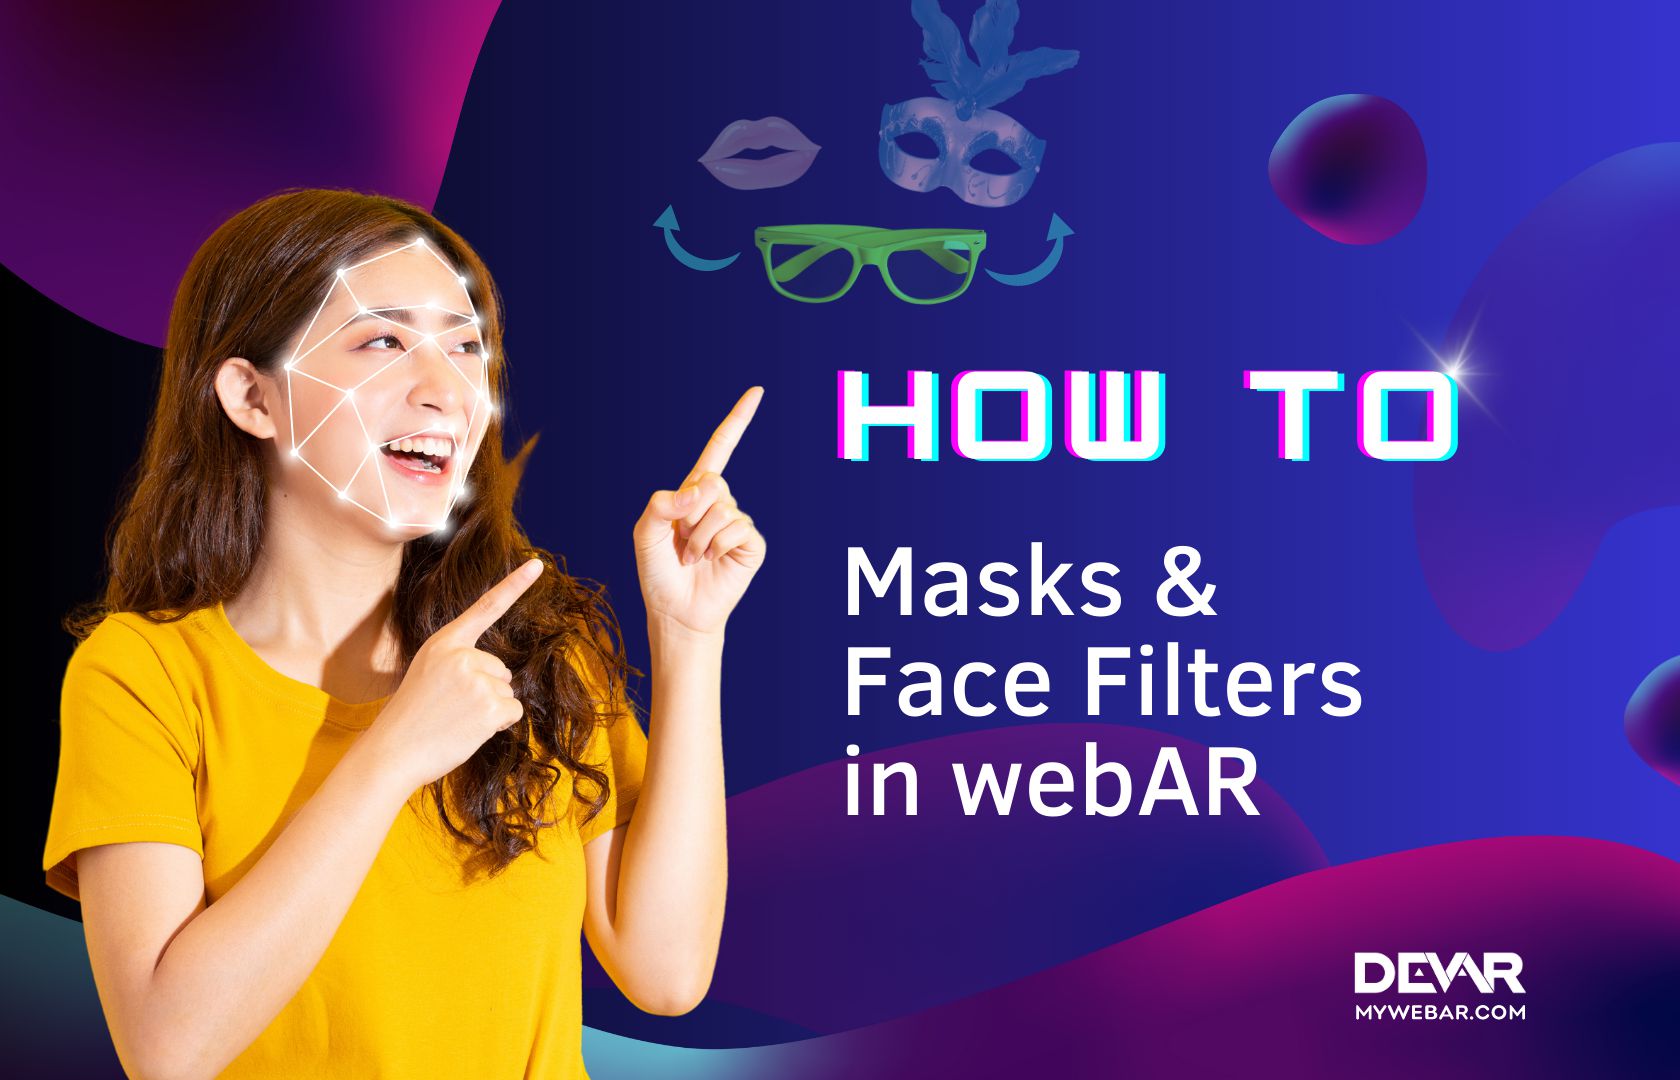 HOW TO: Masks and Face Filters in webAR